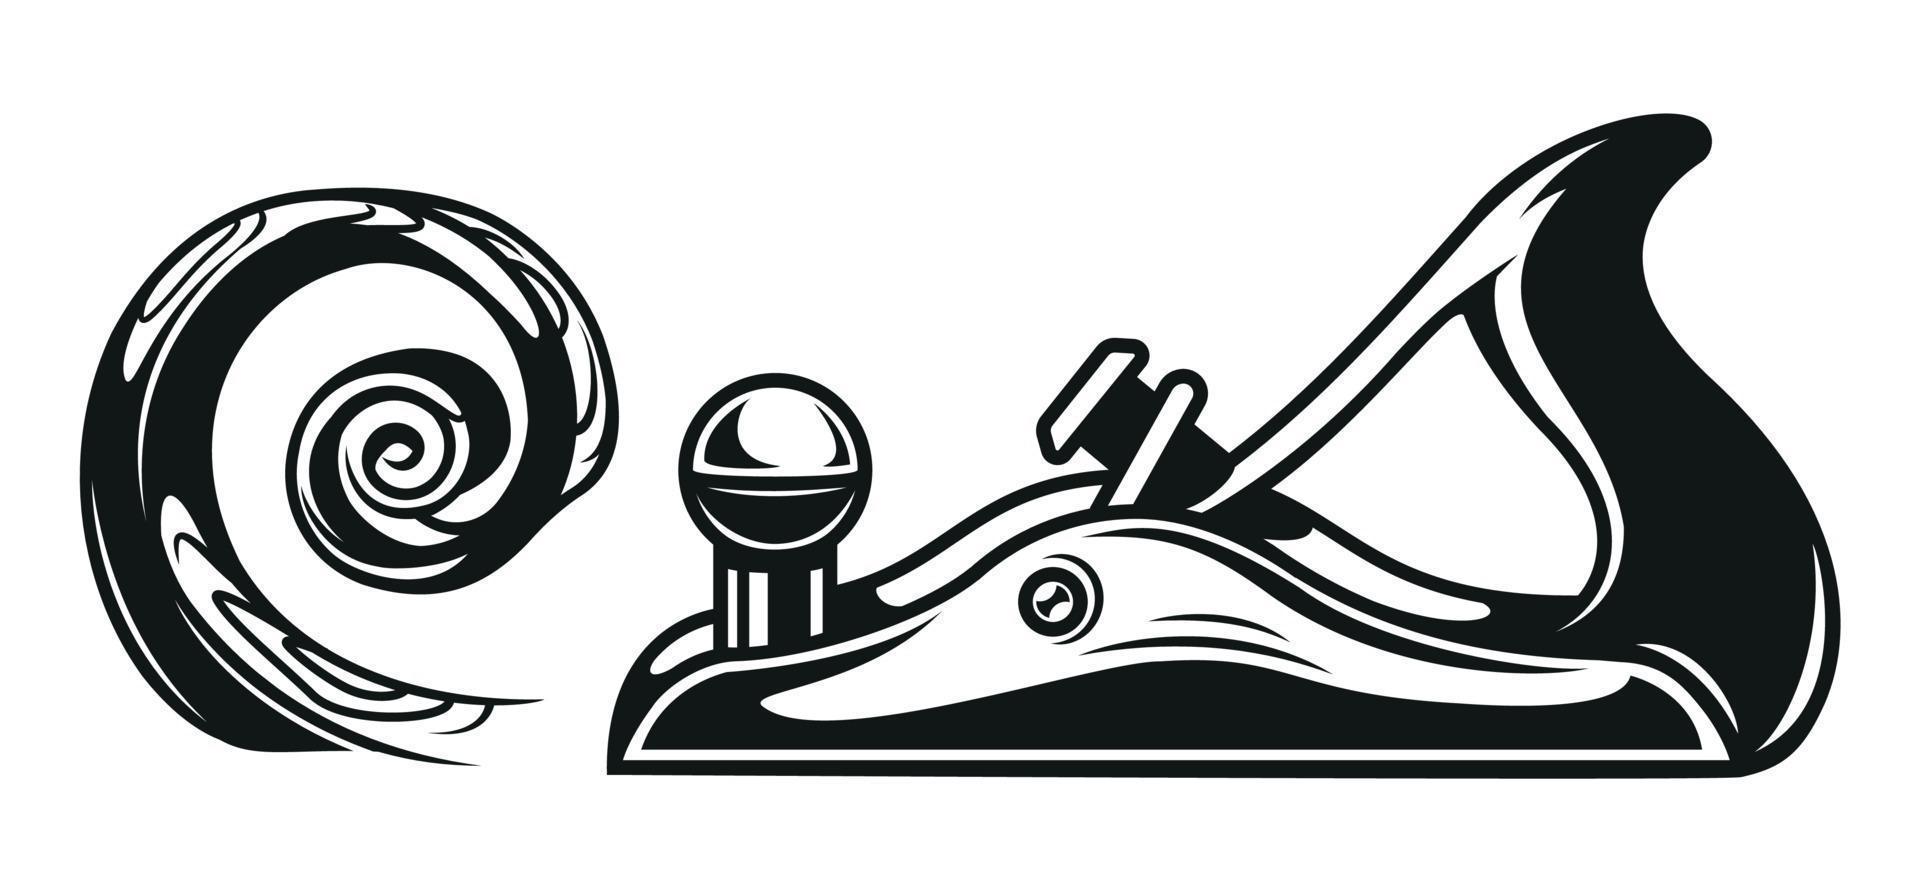 Black and white vector illustration of a planer